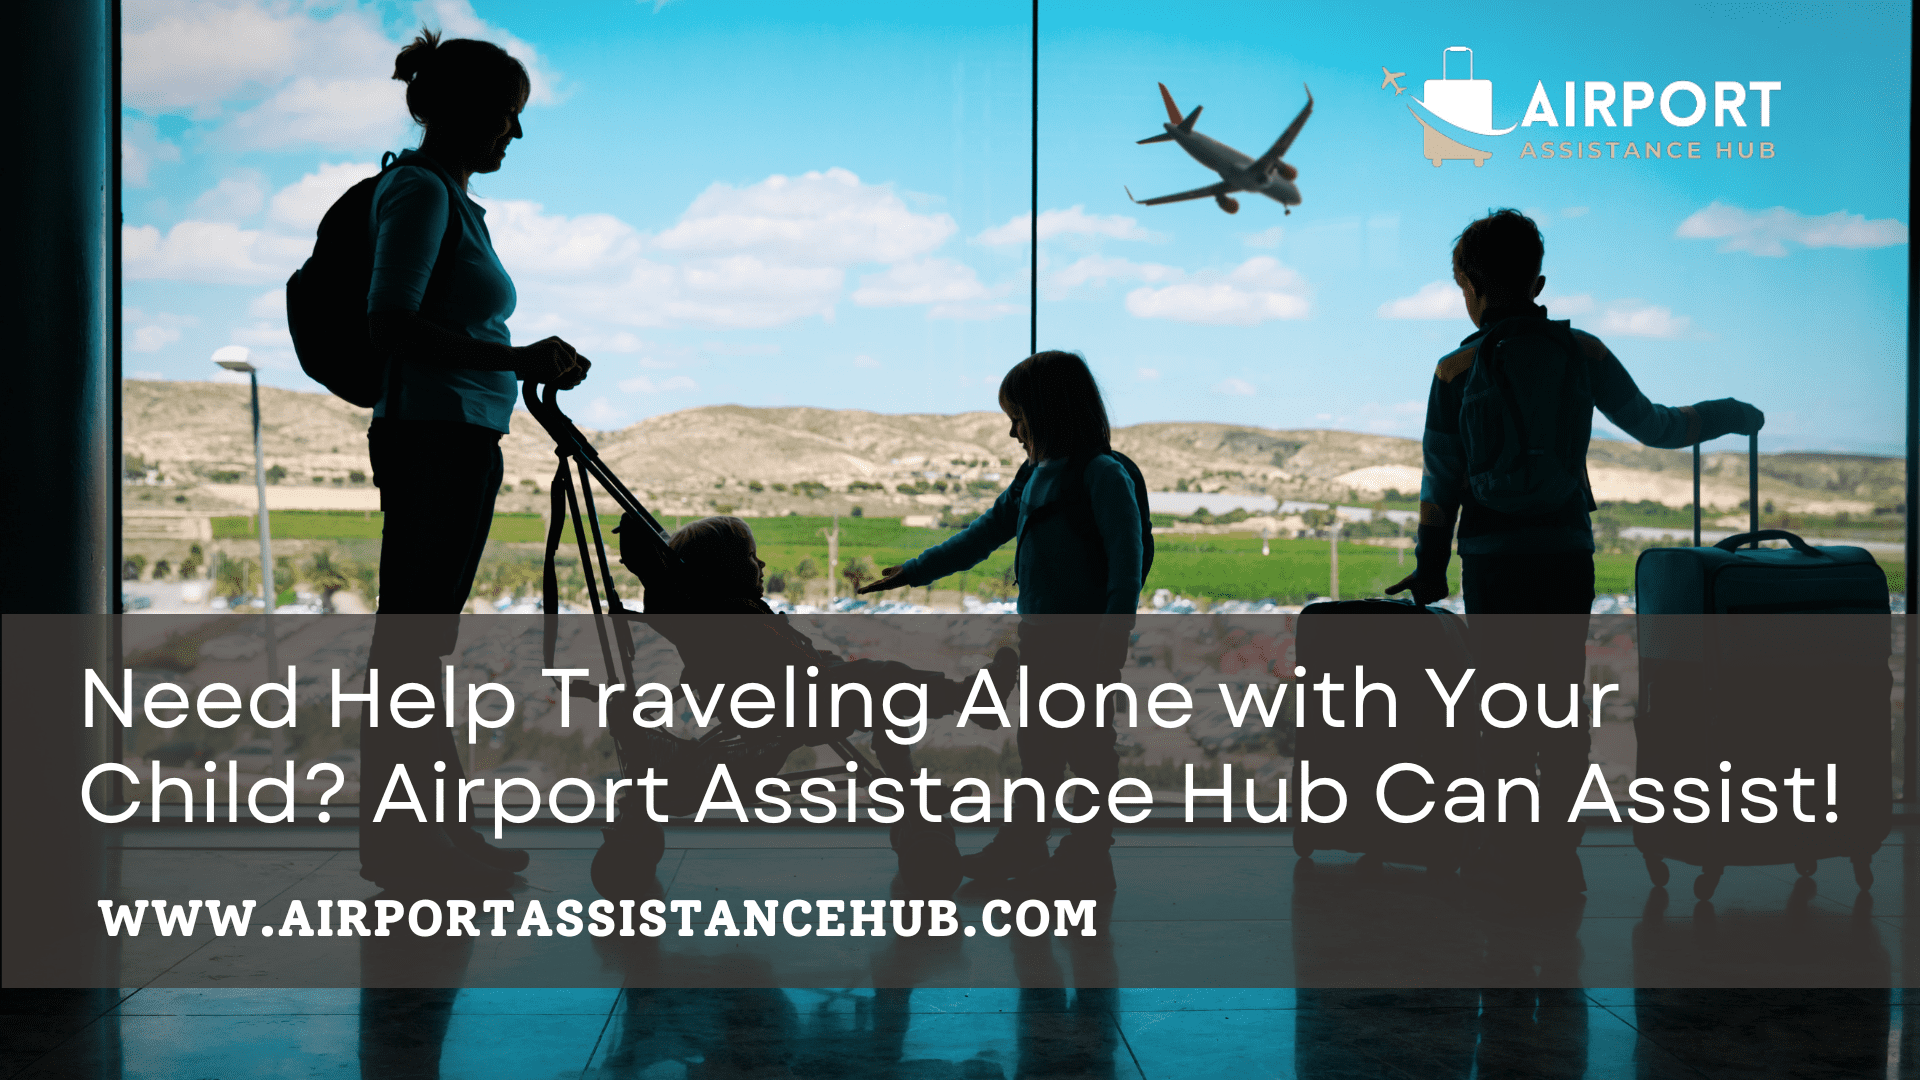 Need Help Traveling Alone with Your Child? Airport Assistance Hub Can Assist!